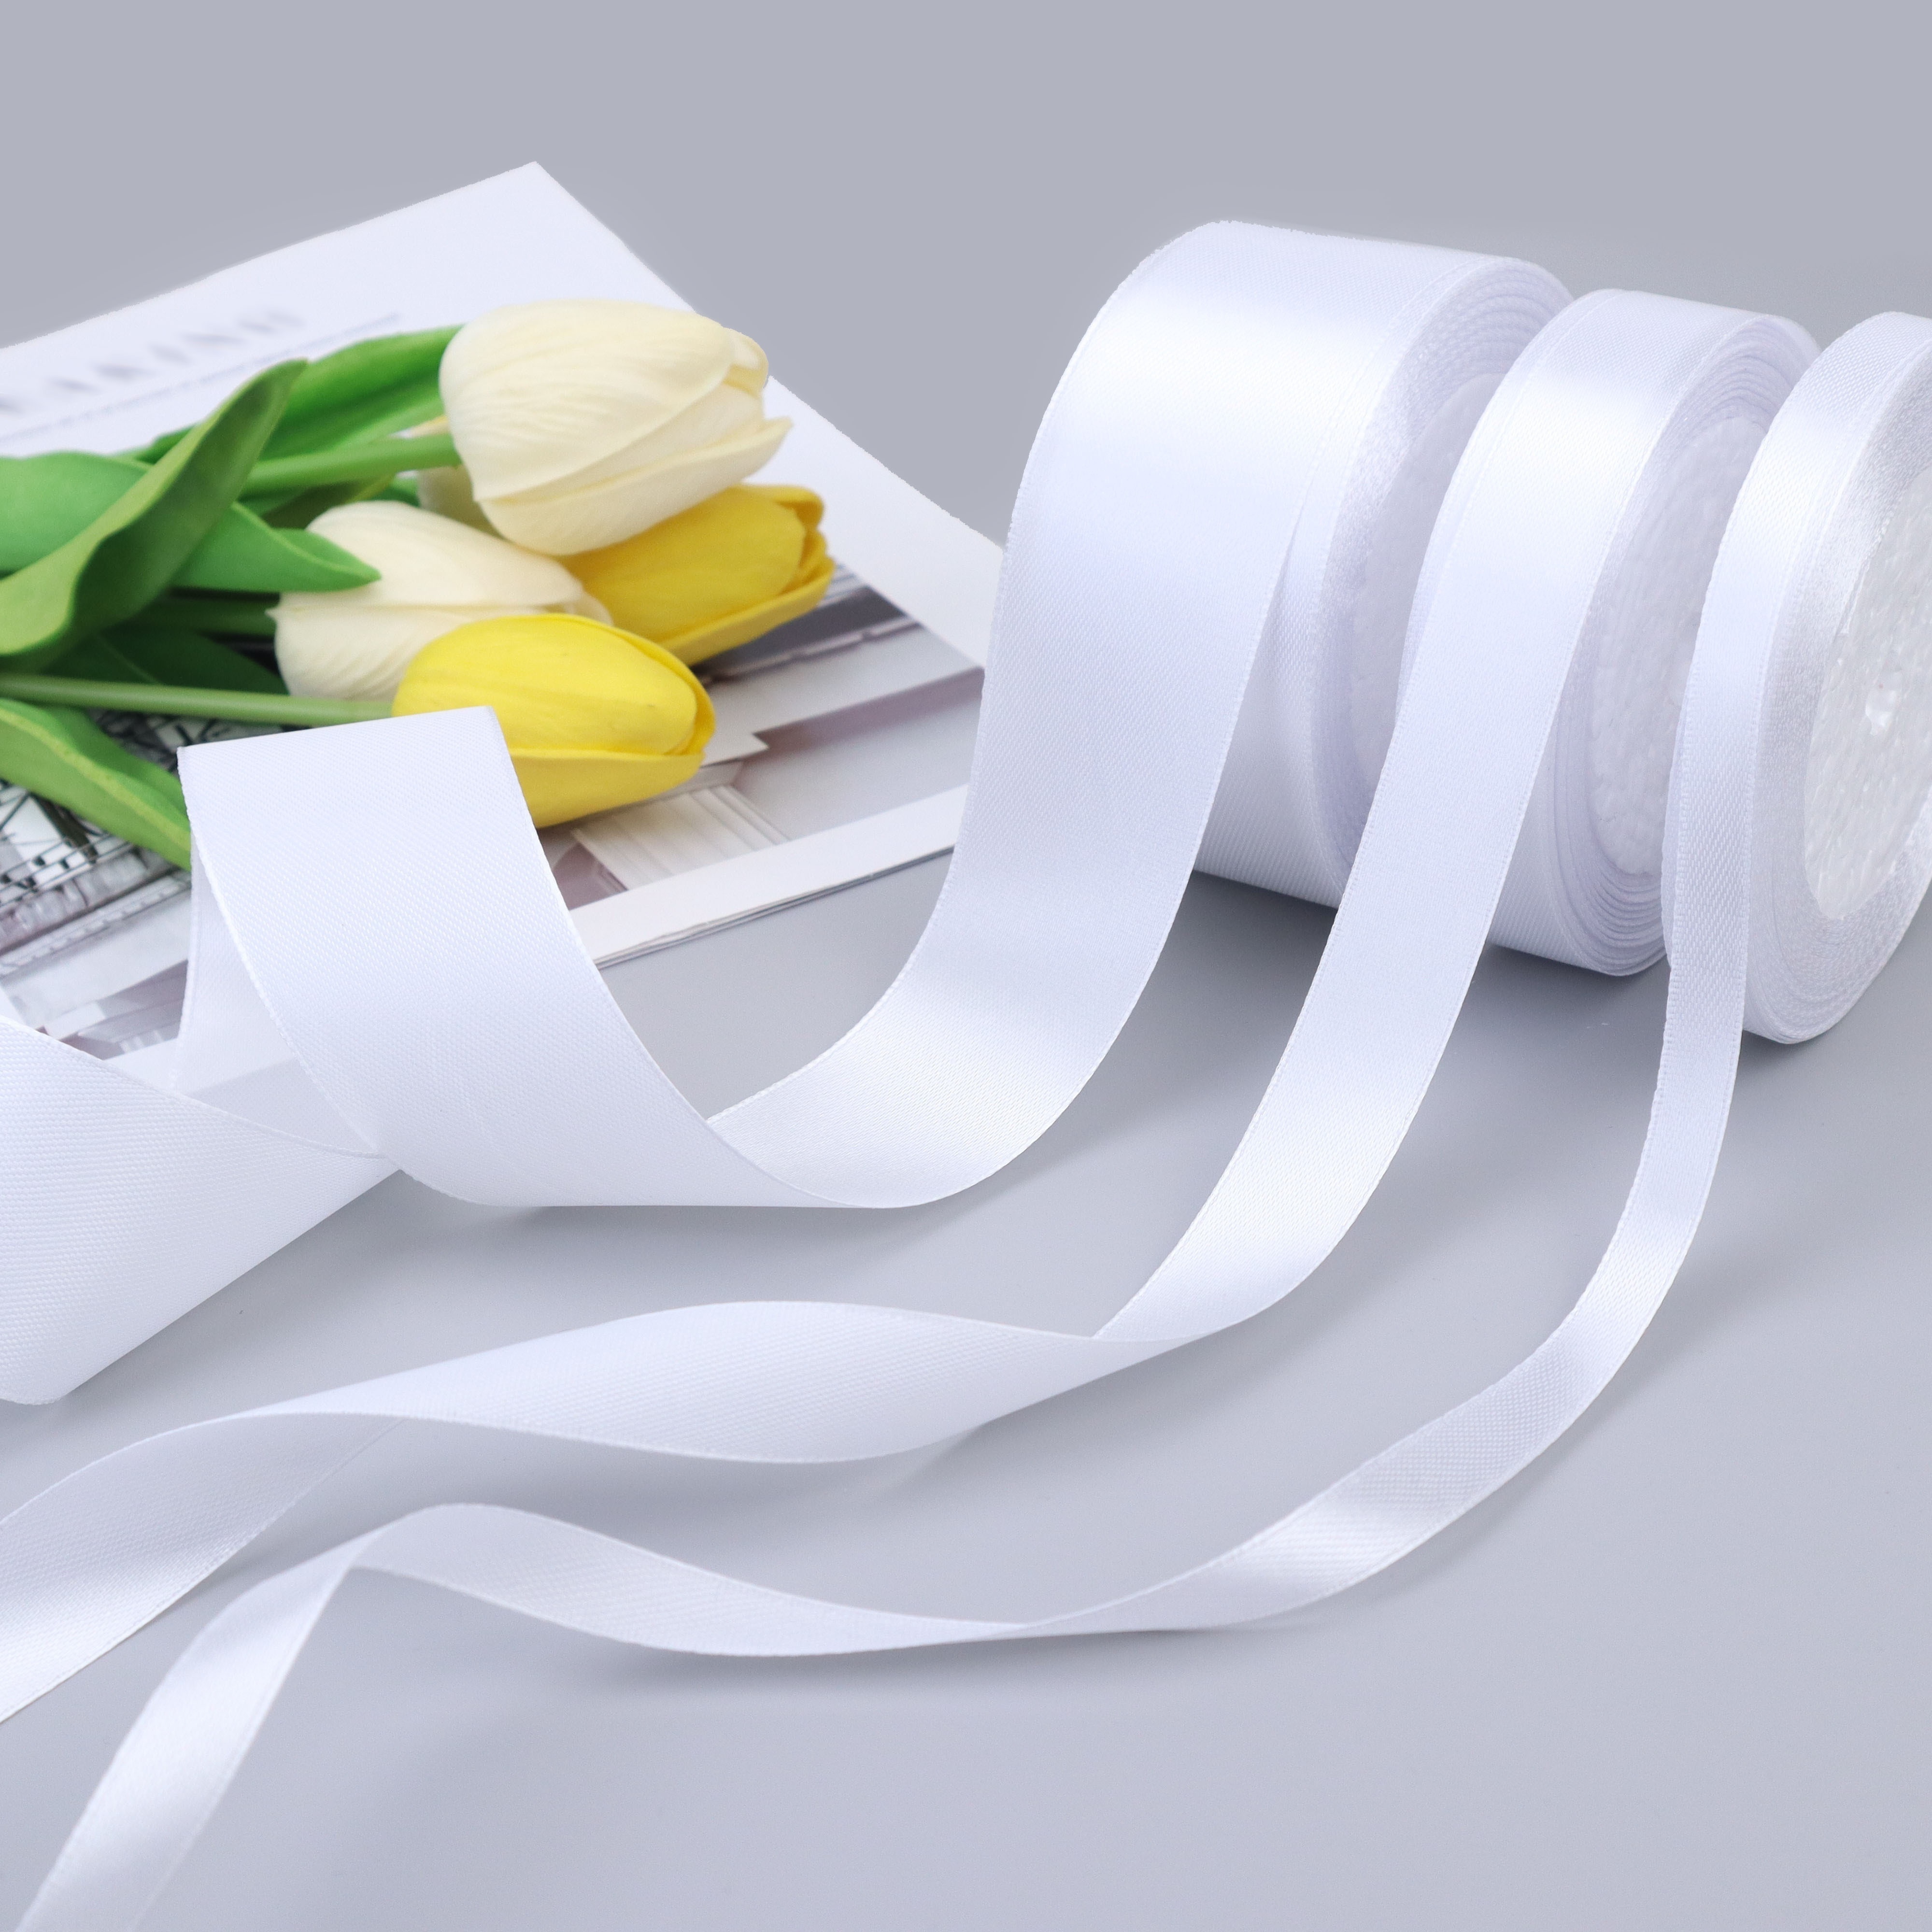 

25 Yards/roll White Satin Ribbon, Packing Bow Ribbon For Gifts Package Wrapping, Bows, Crafting, Wedding Bridal Shower, Birthday Party Decor Supplies, Flower Wrapping